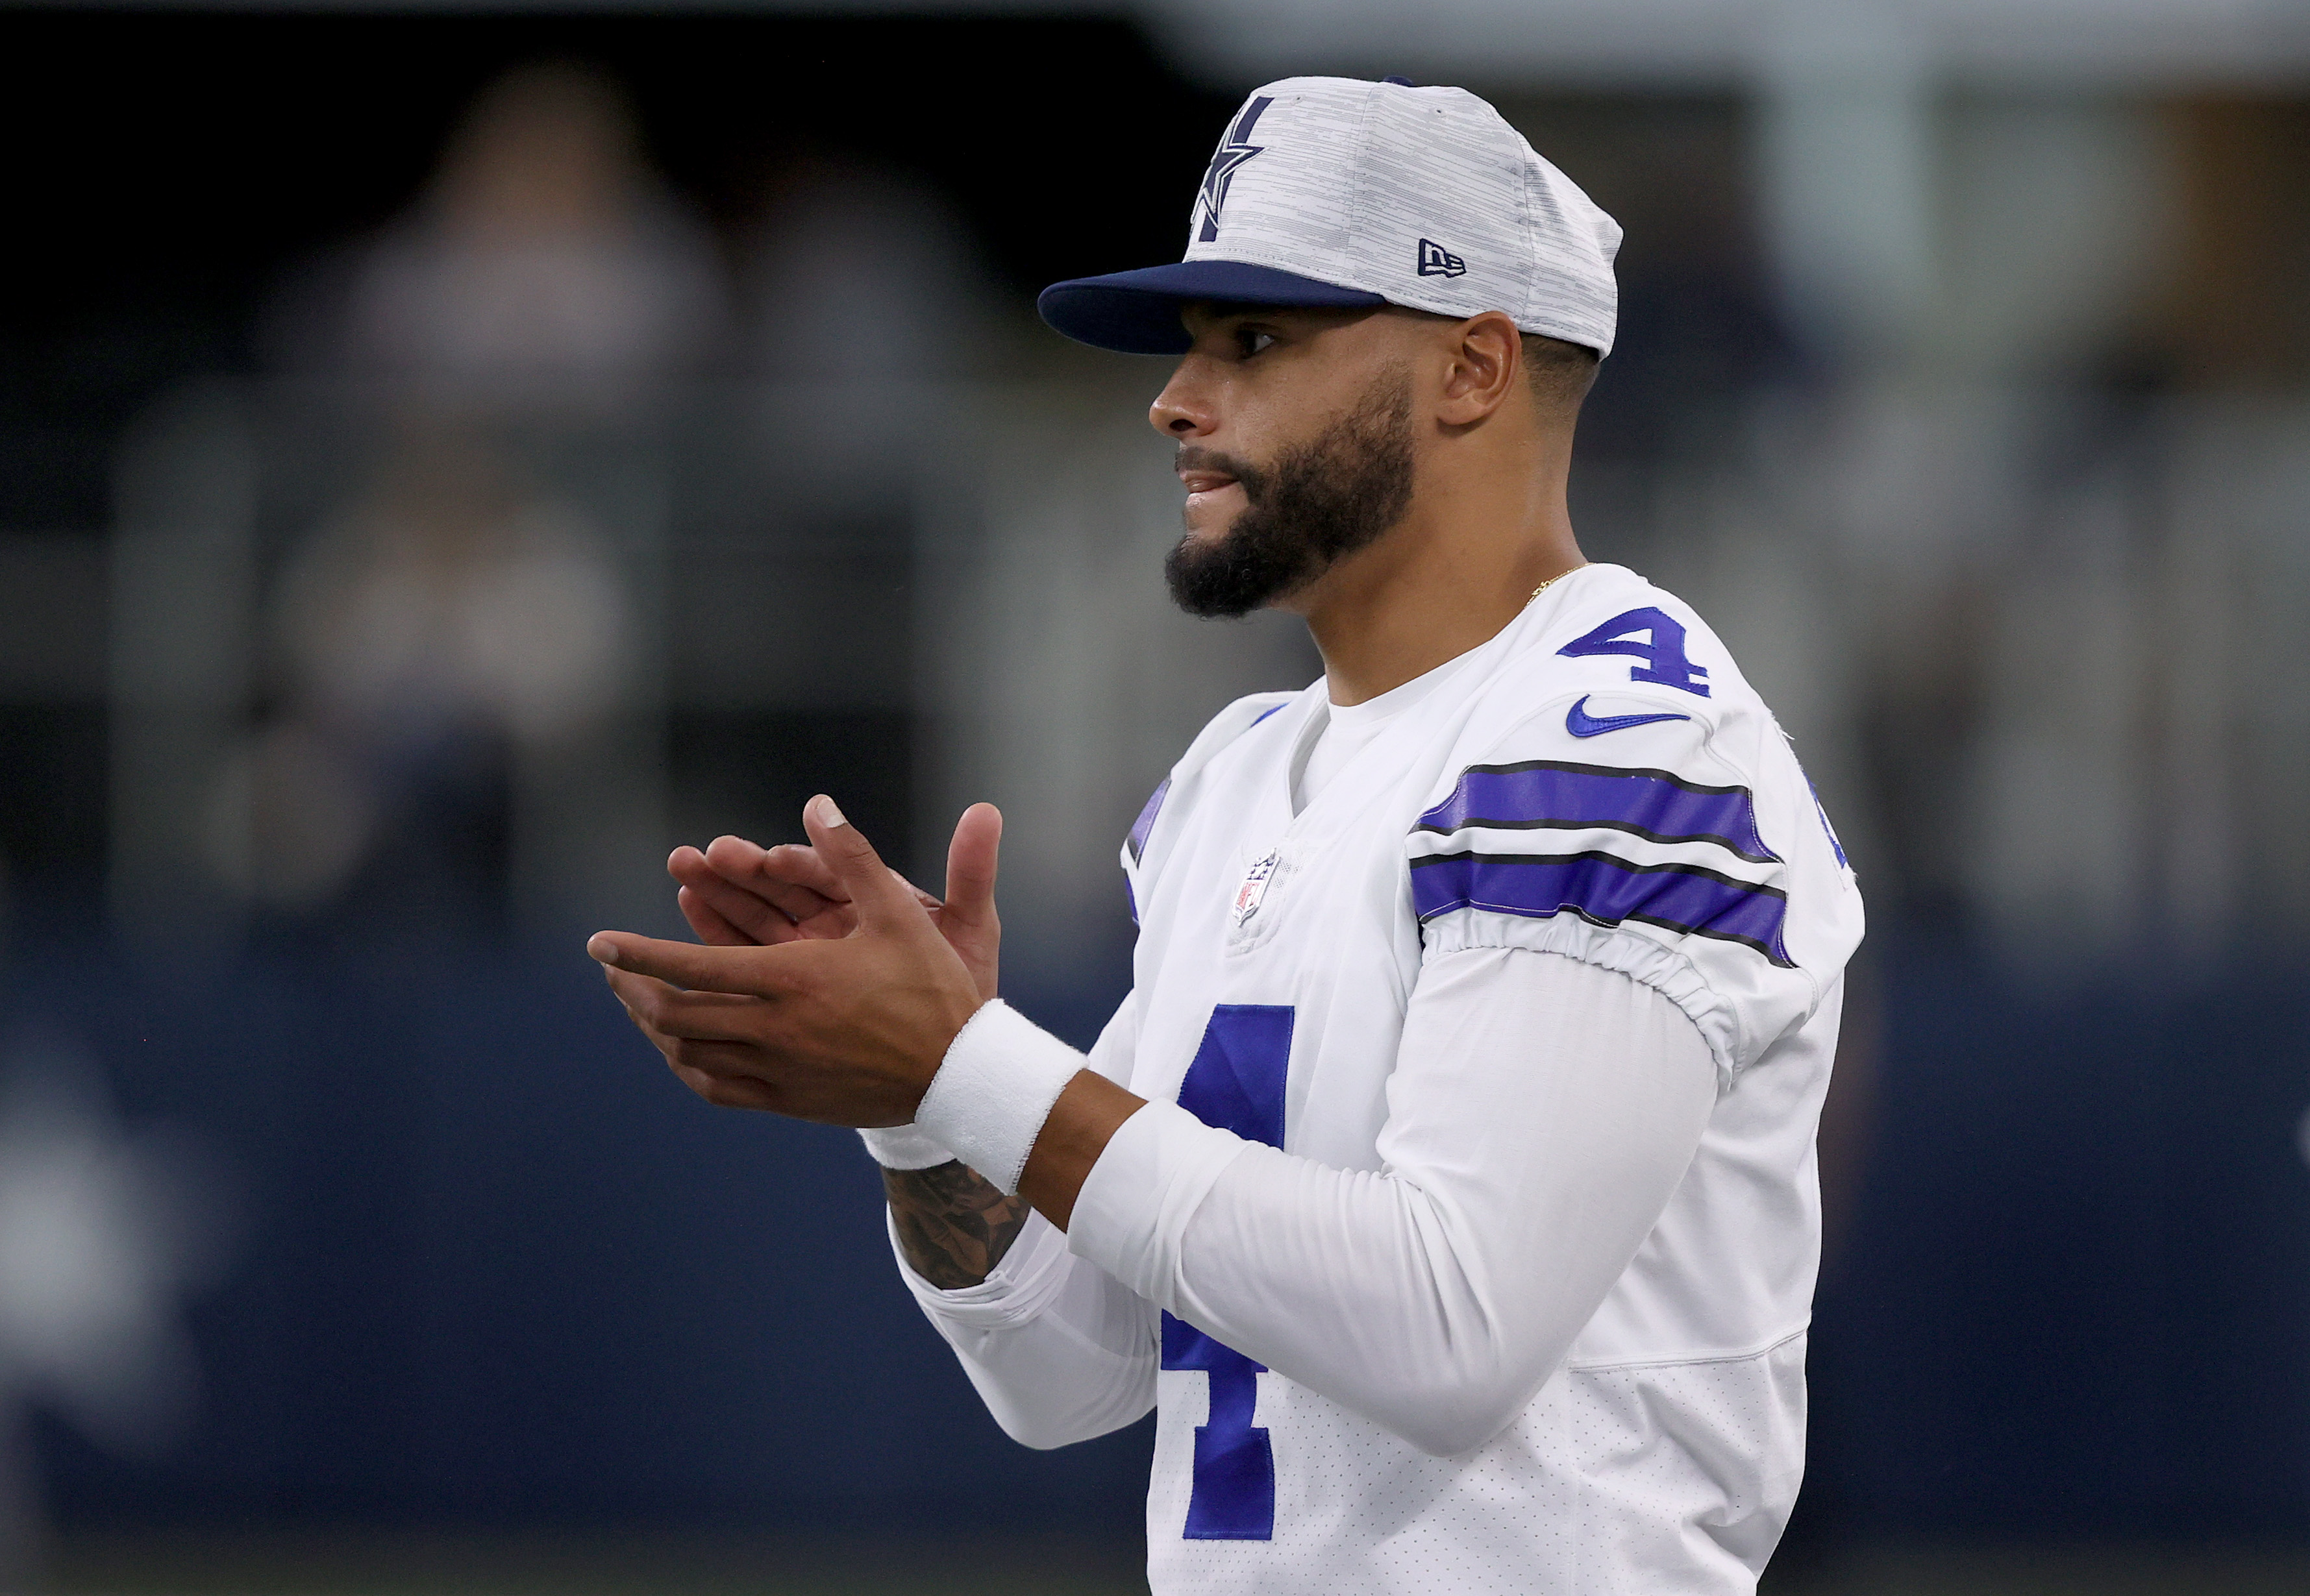 Dak Prescott on the field as the Cowboys prepare for the Buccaneers